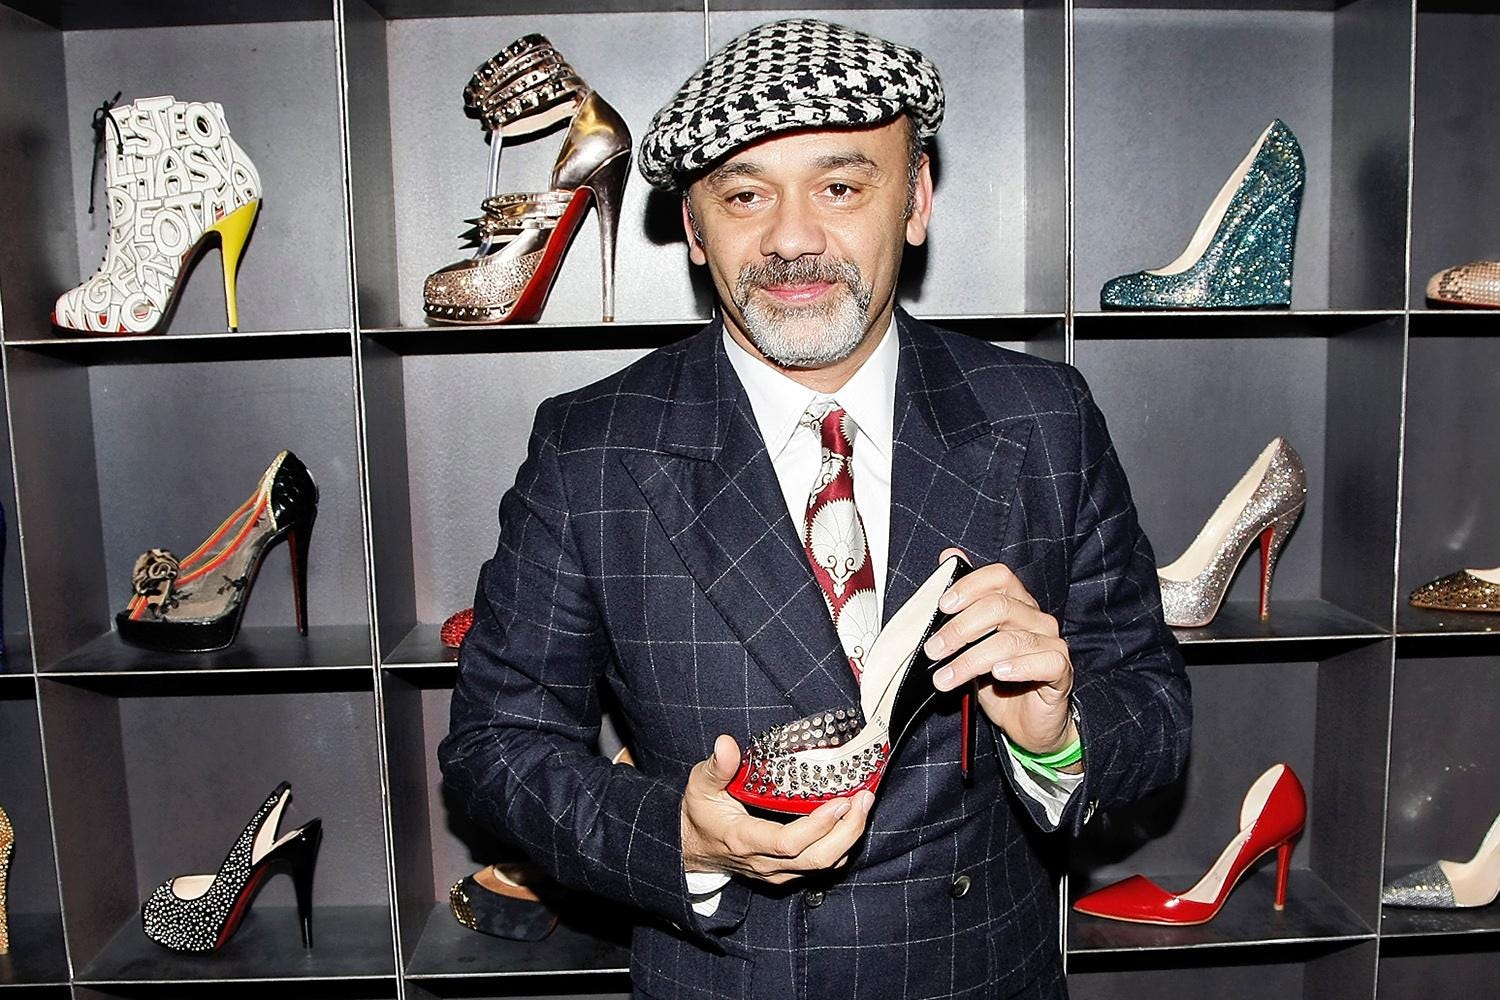 Agnelli Family Buys $642 Million Stake In Christian Louboutin As It Expands  Further Into Luxury